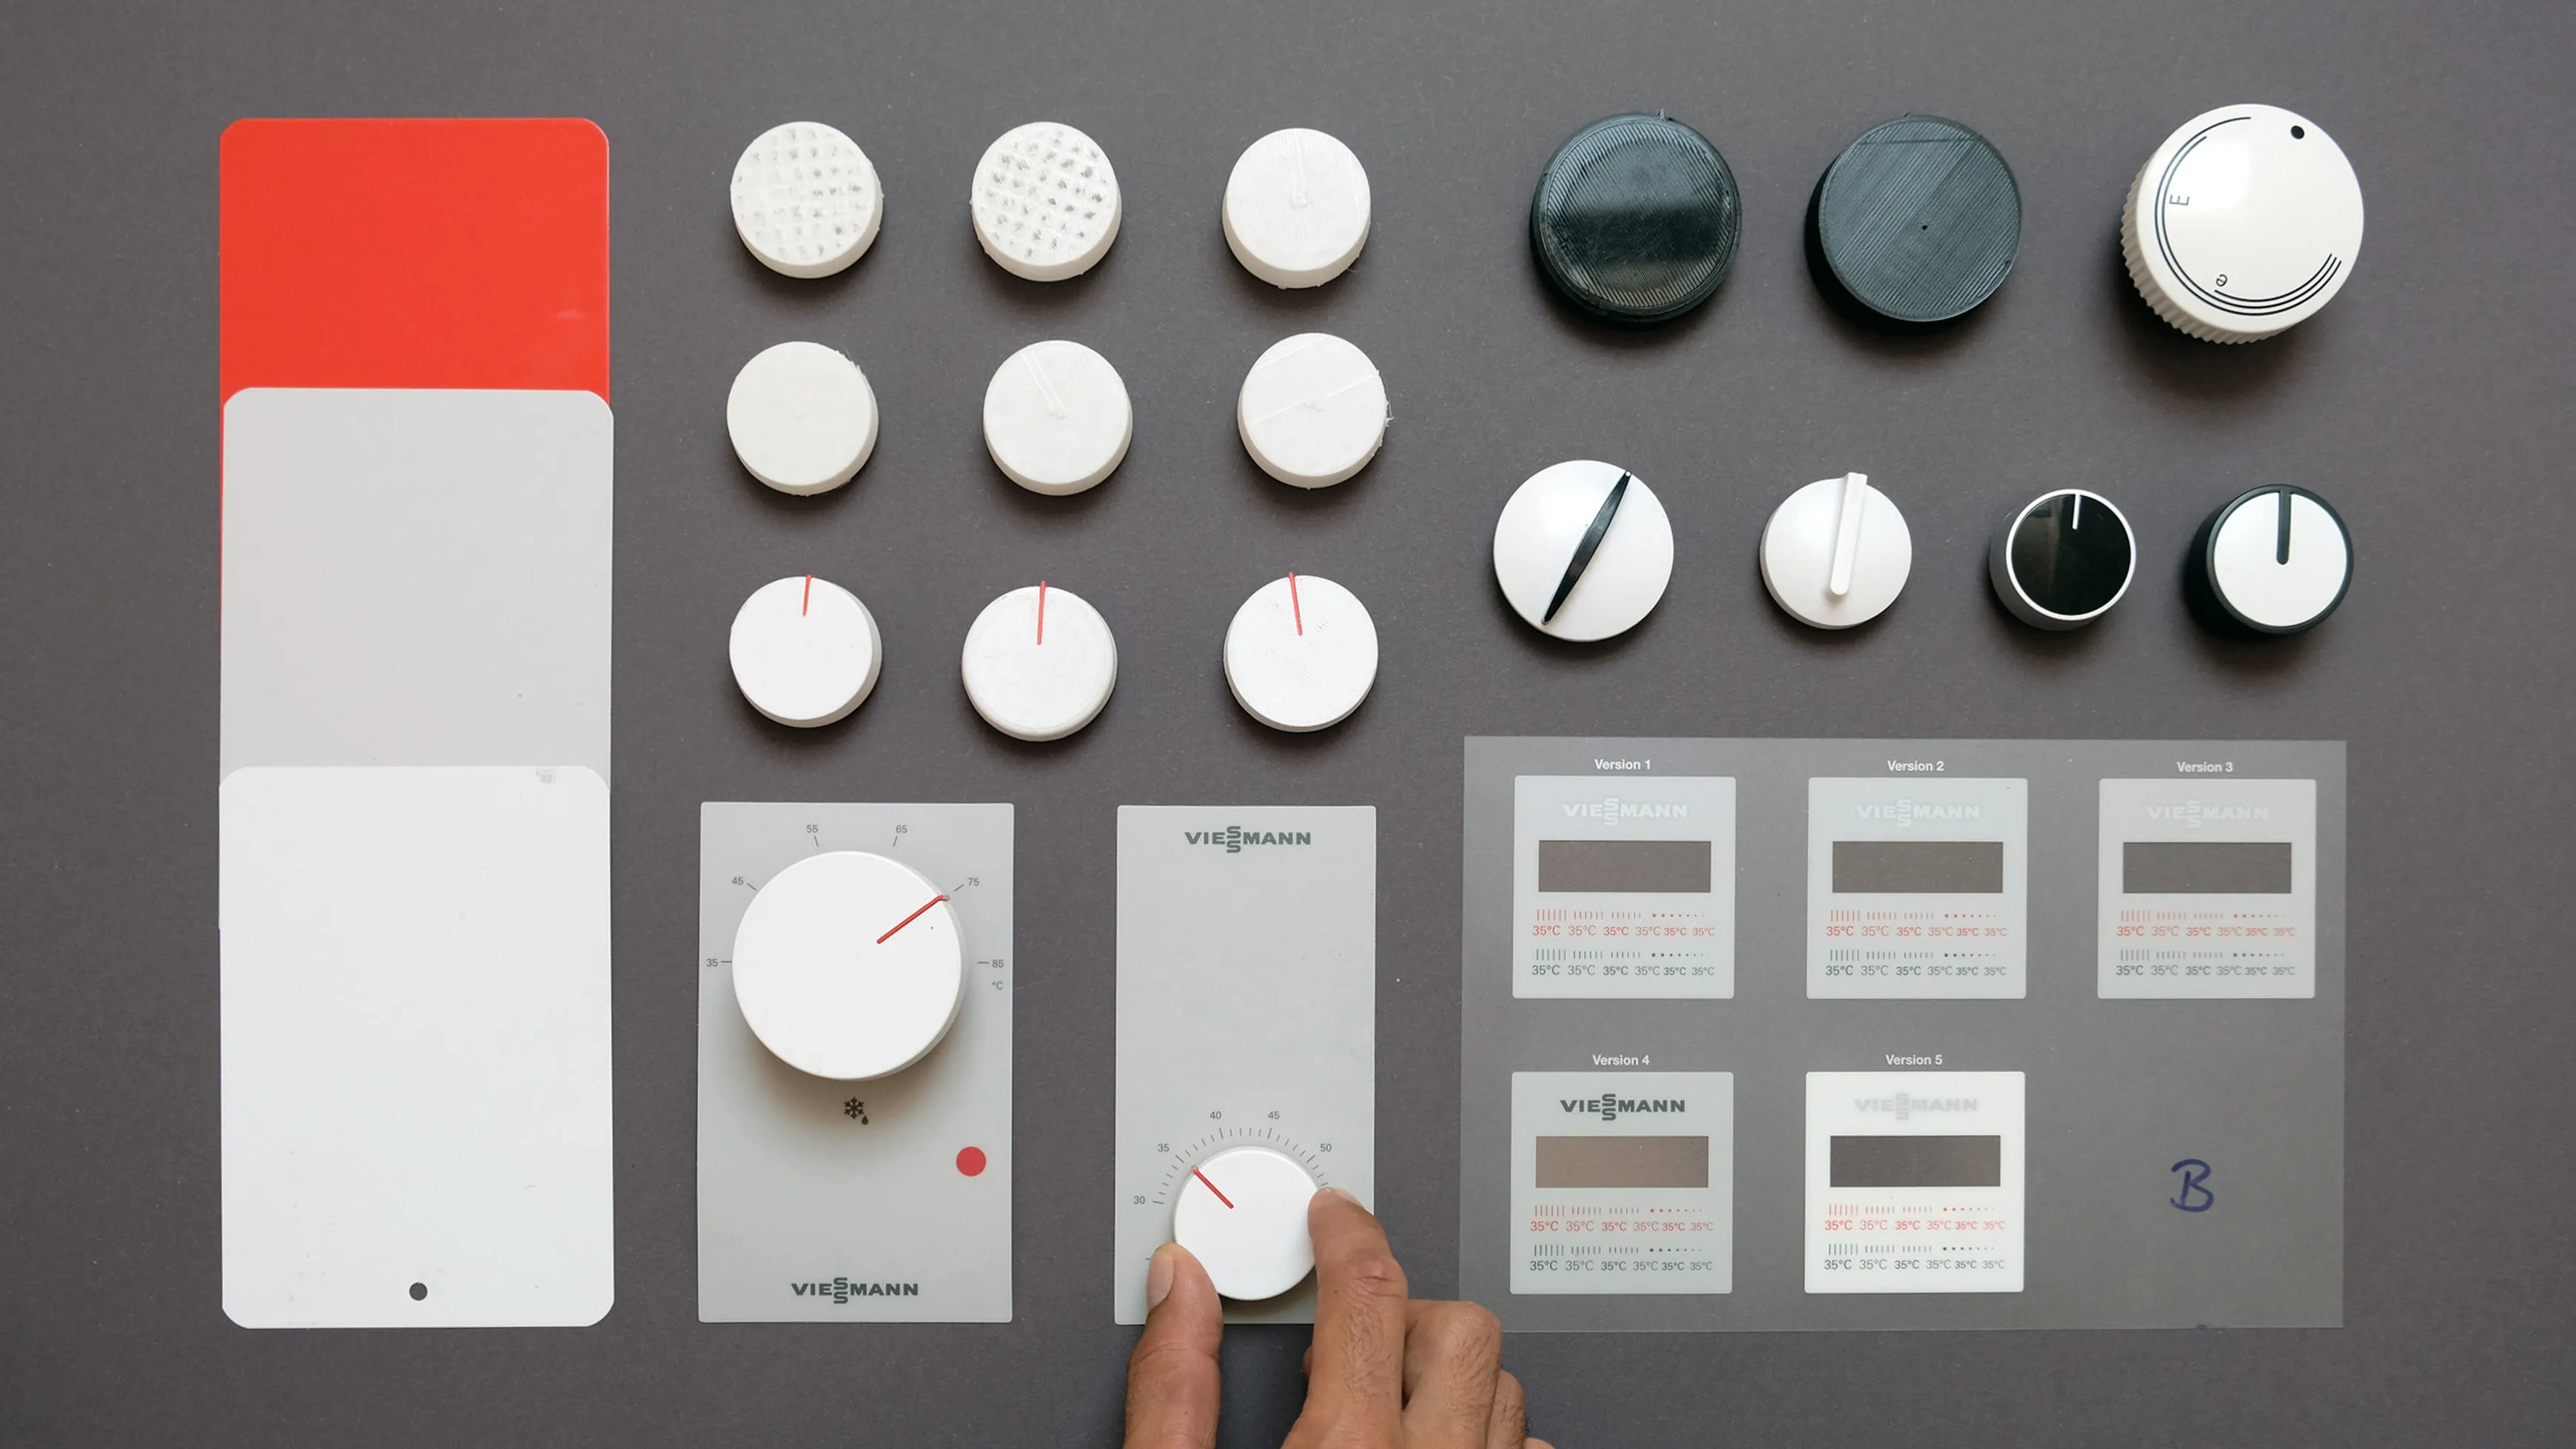 Models of different rotating knobs with Viessmann branding